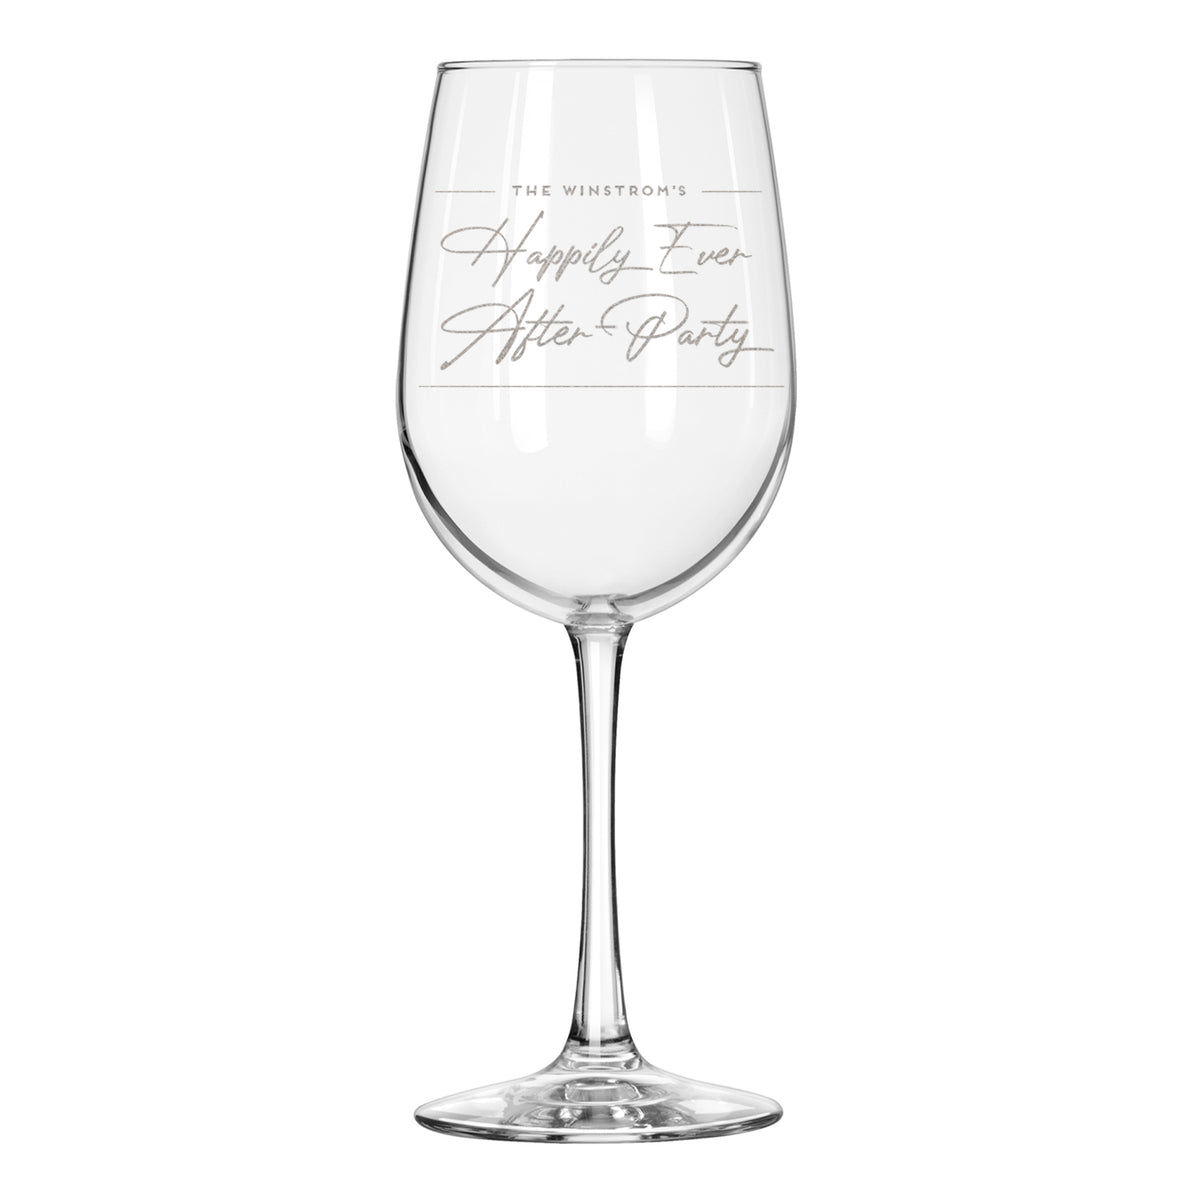 Etched White Wine Glasses Best Friends - Design: BEST - Everything Etched